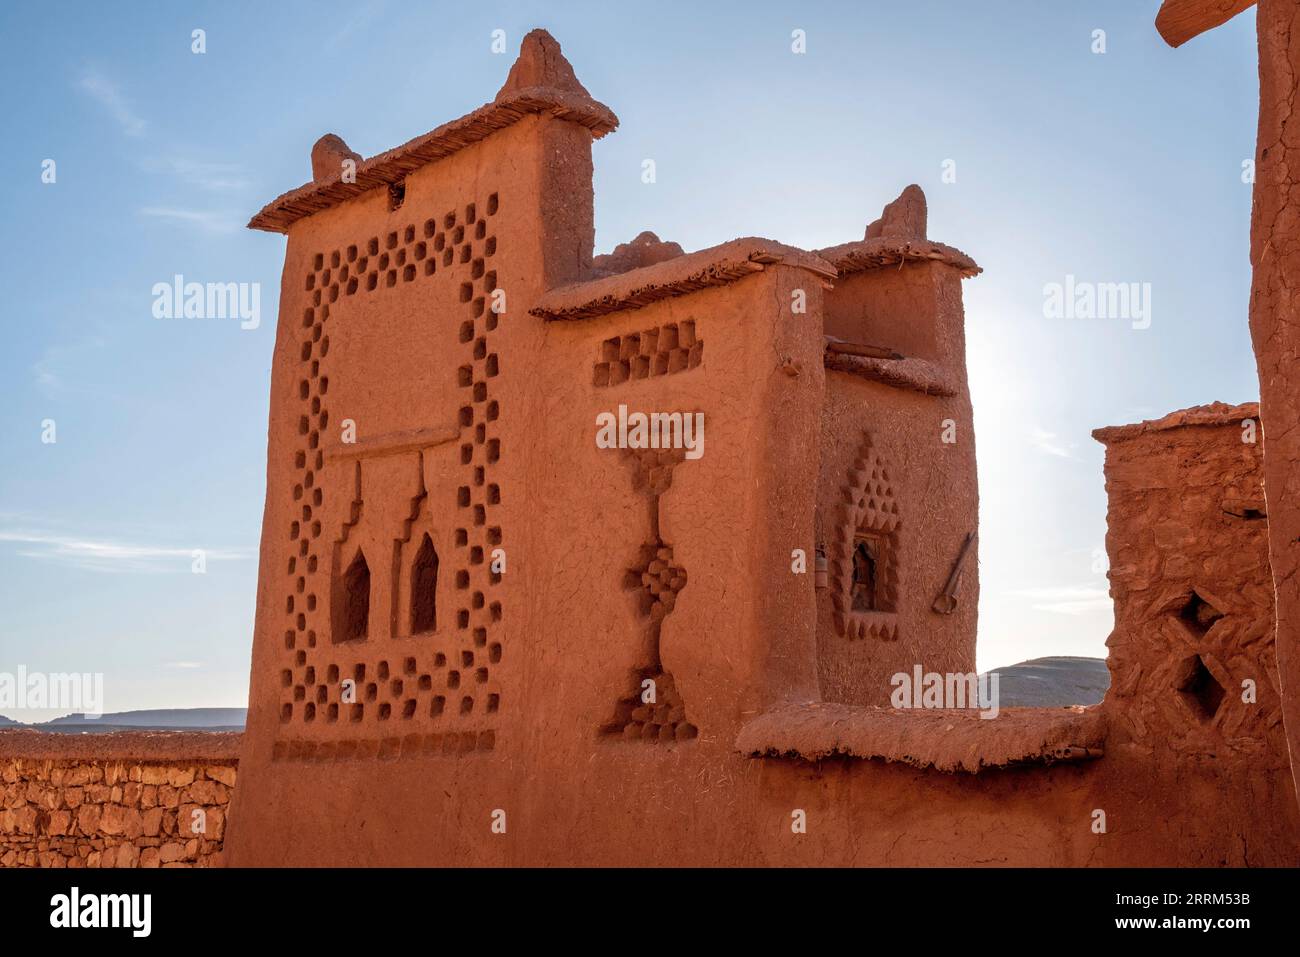 Scenic ornate detail of a small tower over the roofs of the historic Ait Ben Haddou village, Morocco Stock Photo